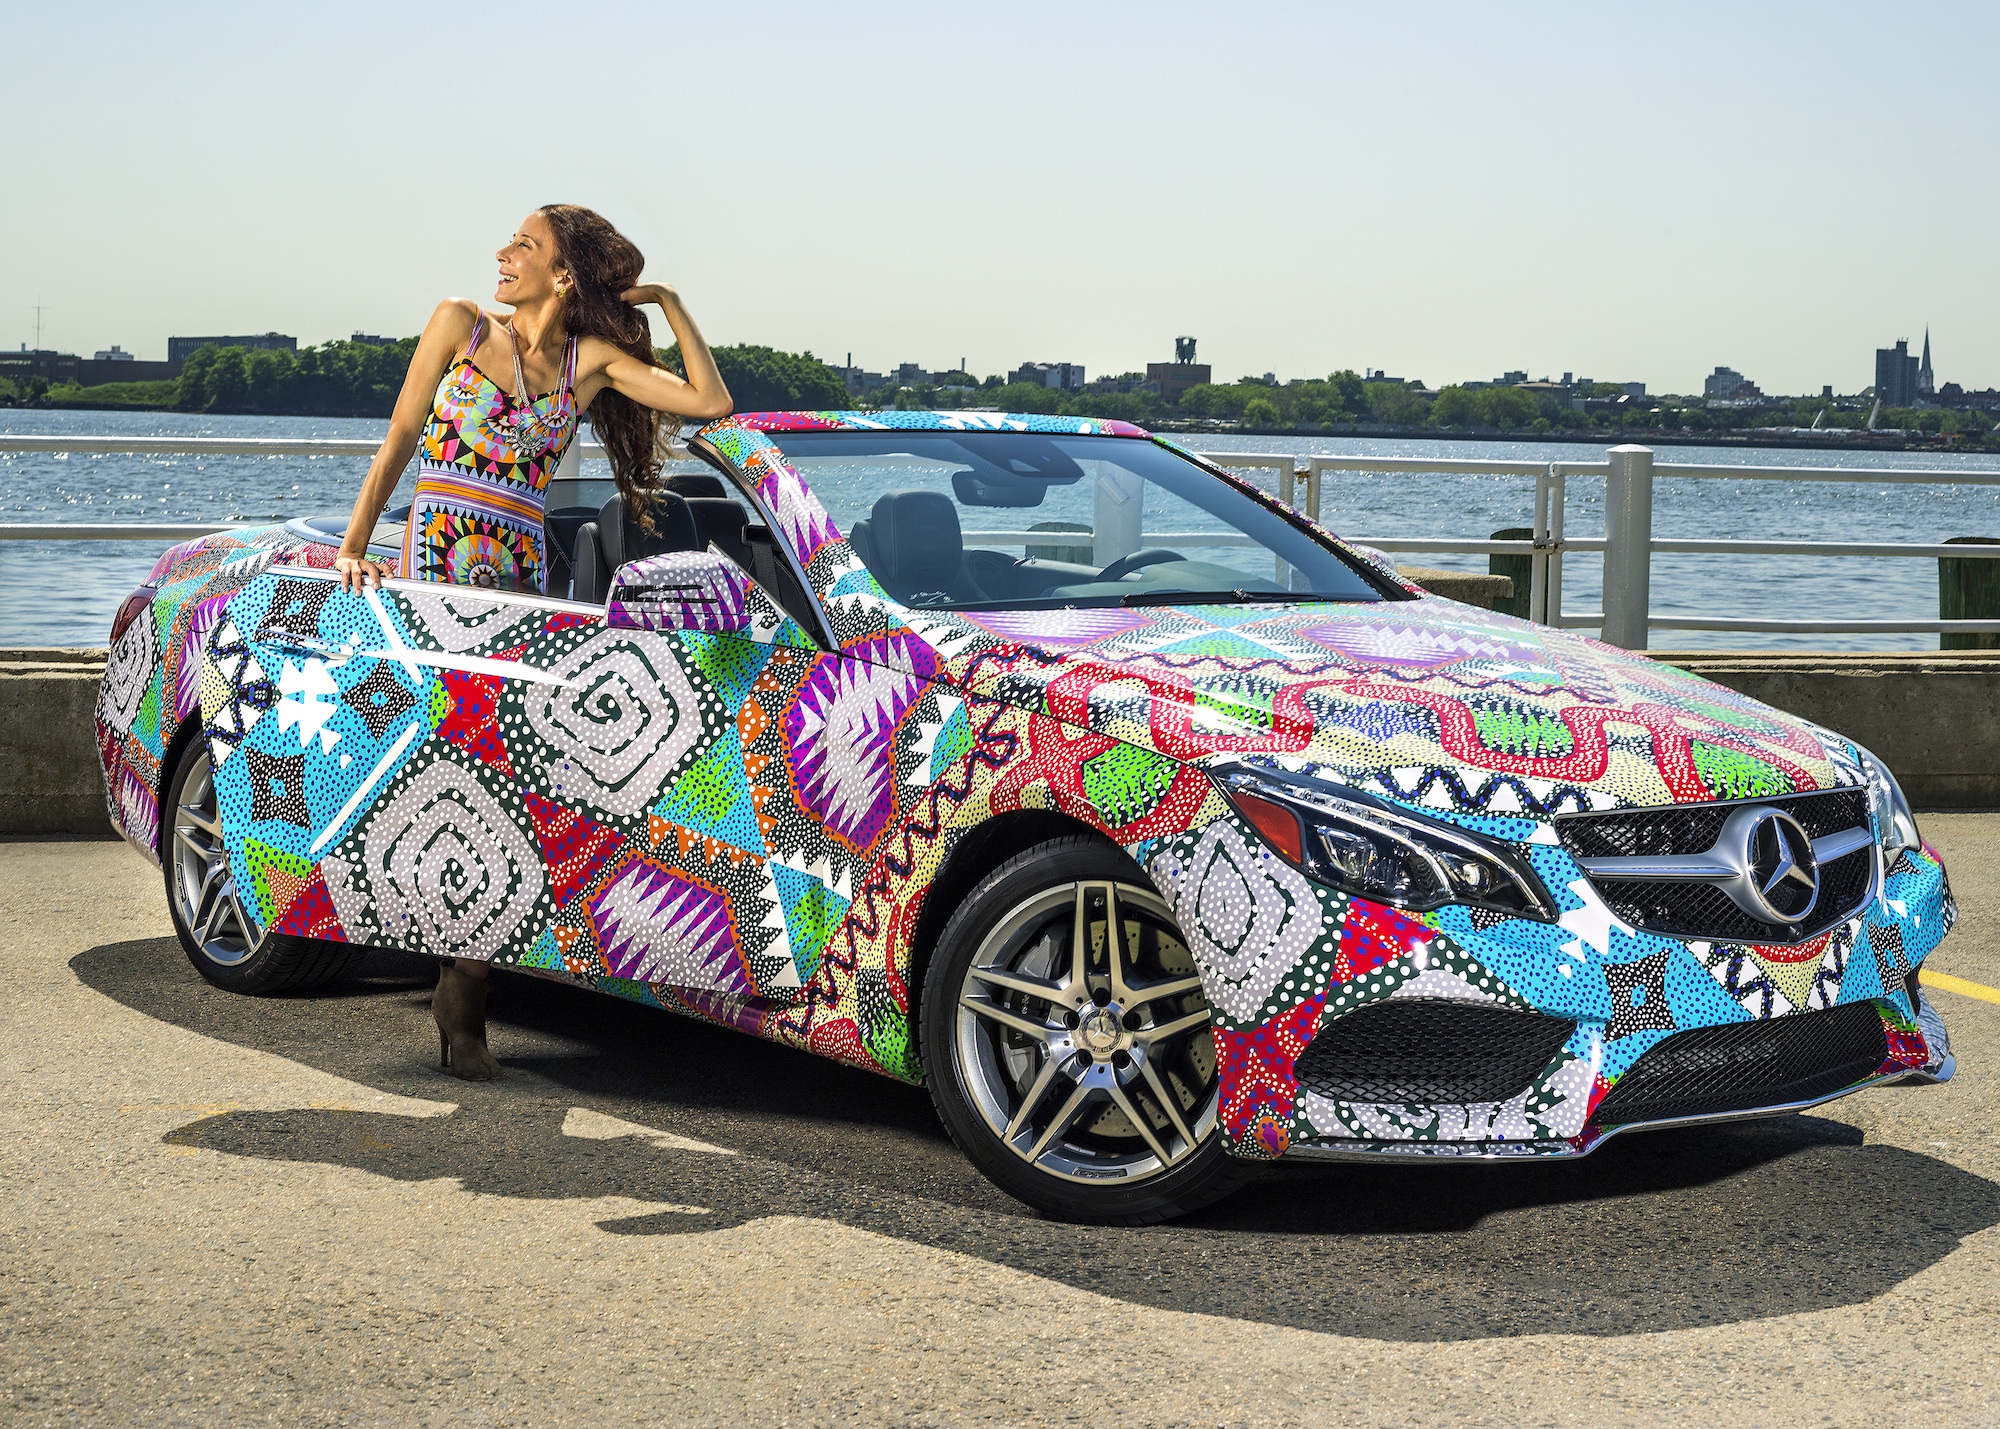 mercedes benz presents does a swimsuit inspired convertible mara hoffman receives  title